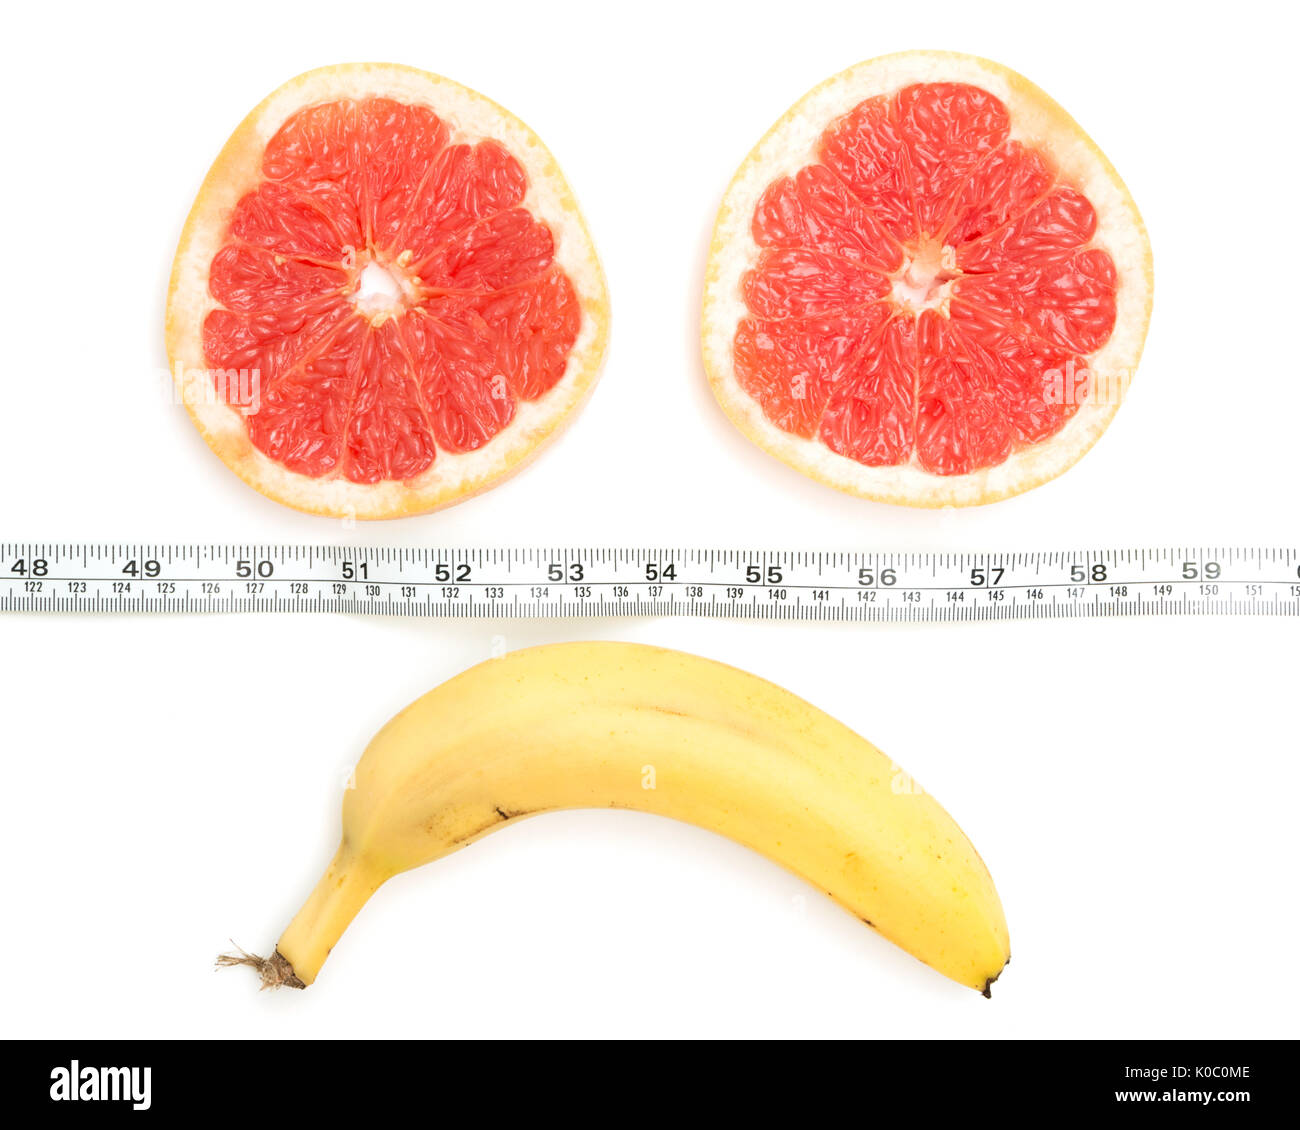 Sad face made from grapefruit, banana and tape measure,  on white background,Diet concept Stock Photo